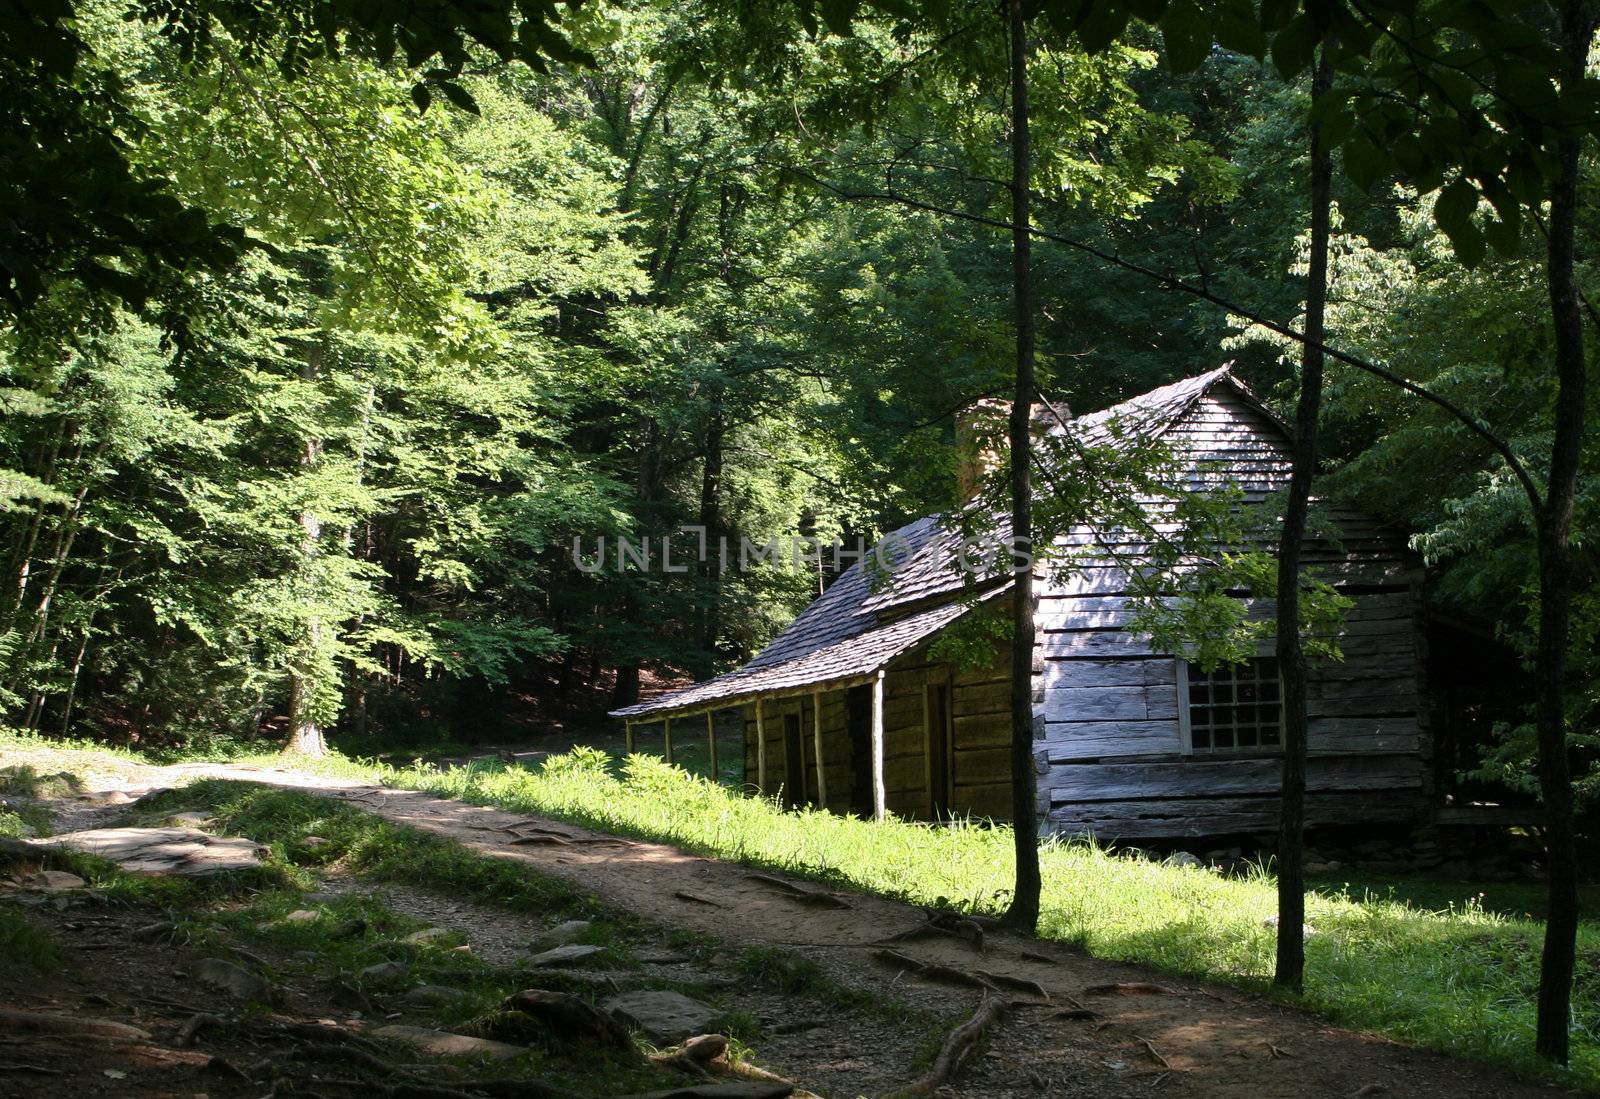 Primitive wooden building in rustic forest setting